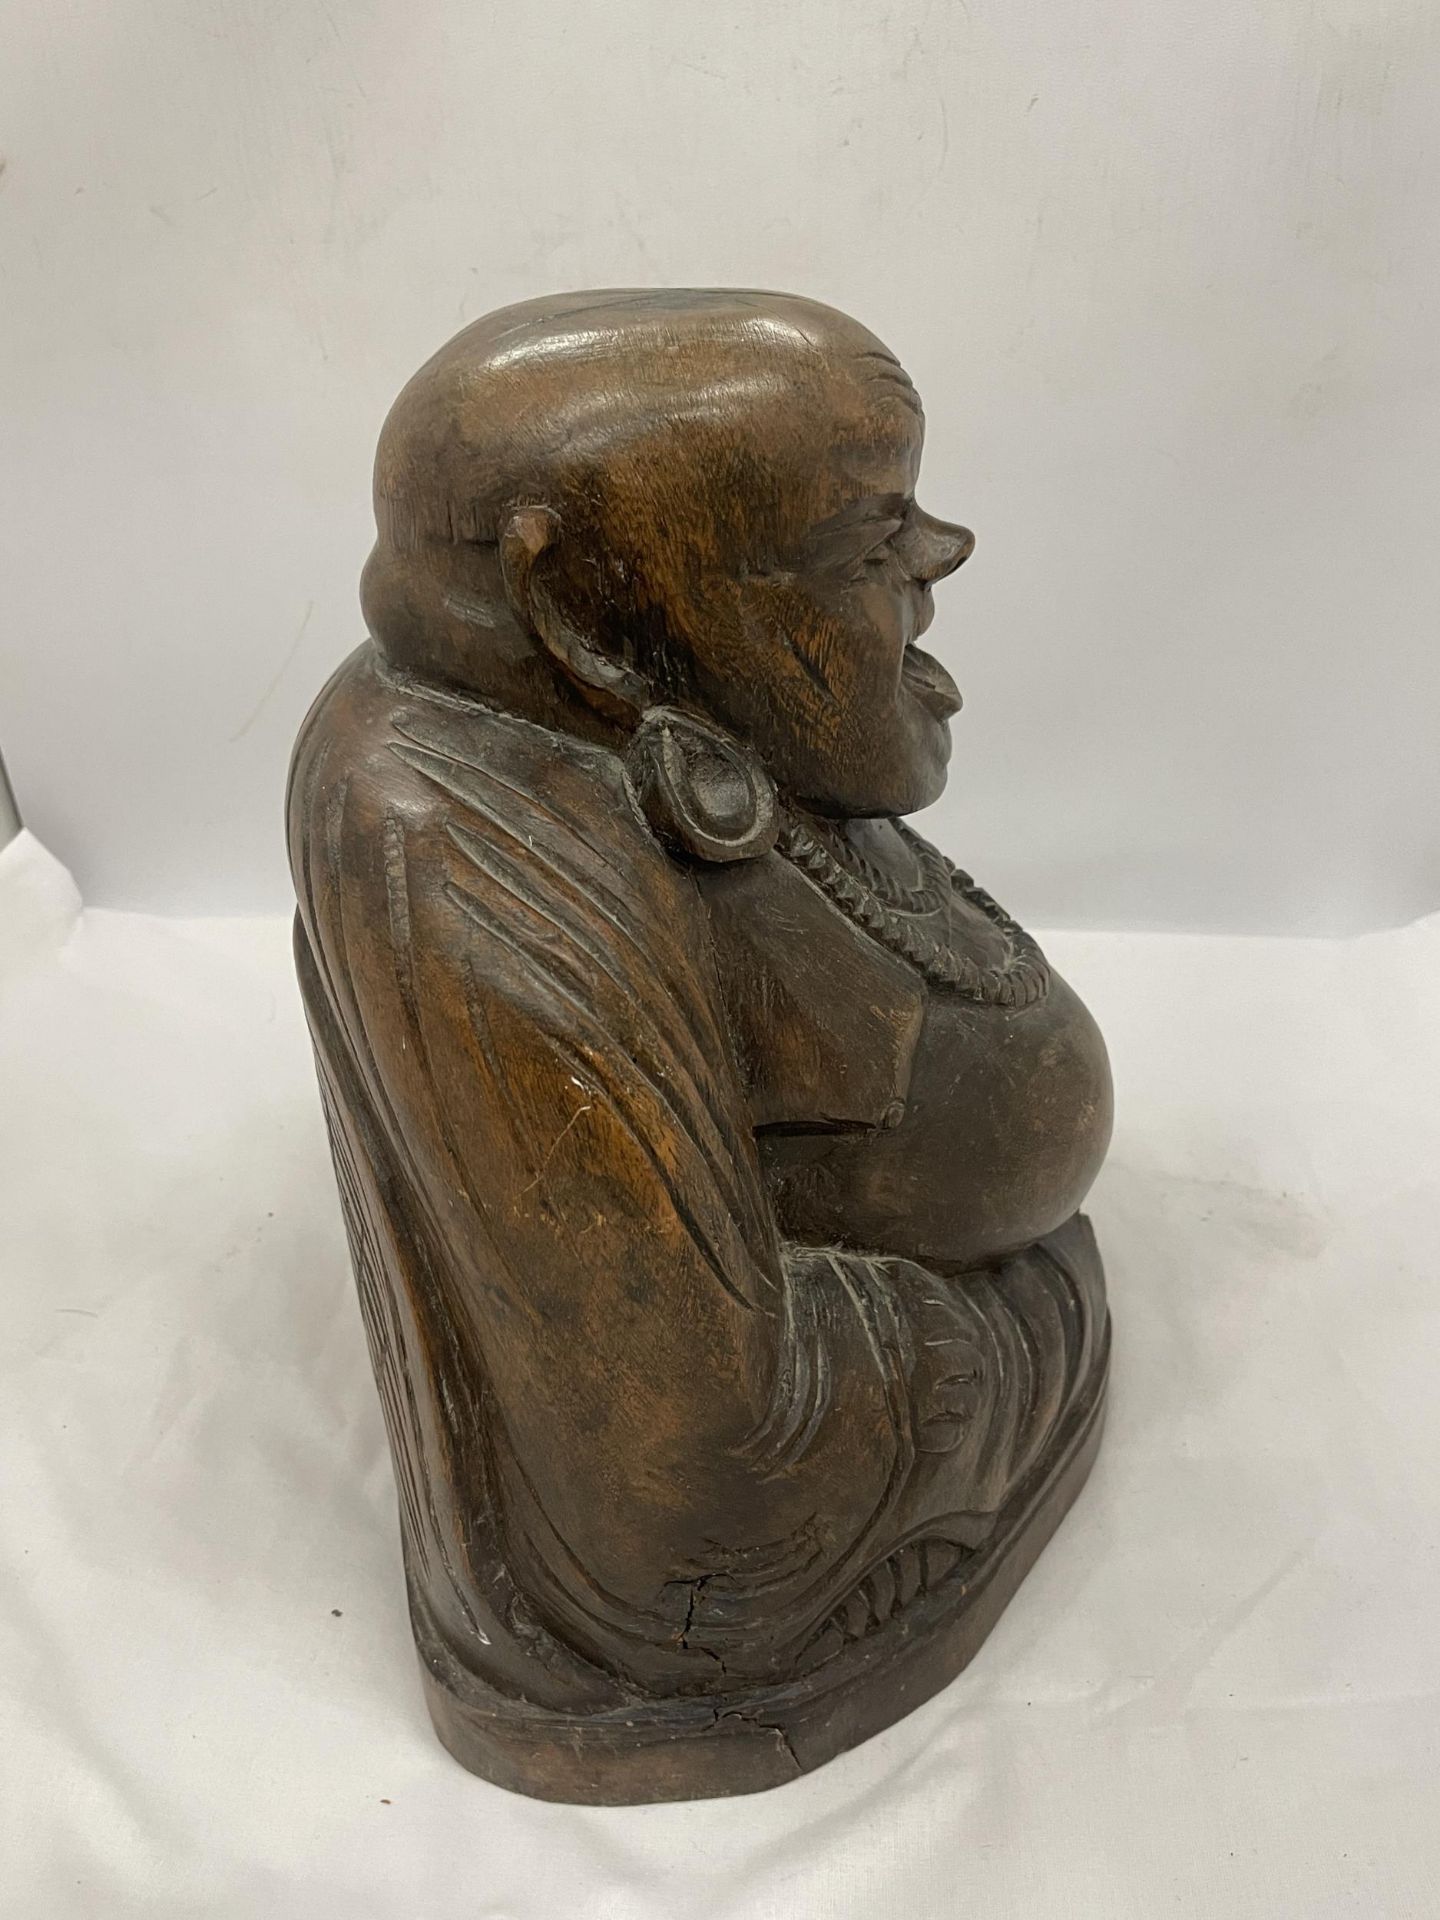 A LARGE CARVED WOODEN BUDDHA FIGURE 13" TALL - Image 2 of 4